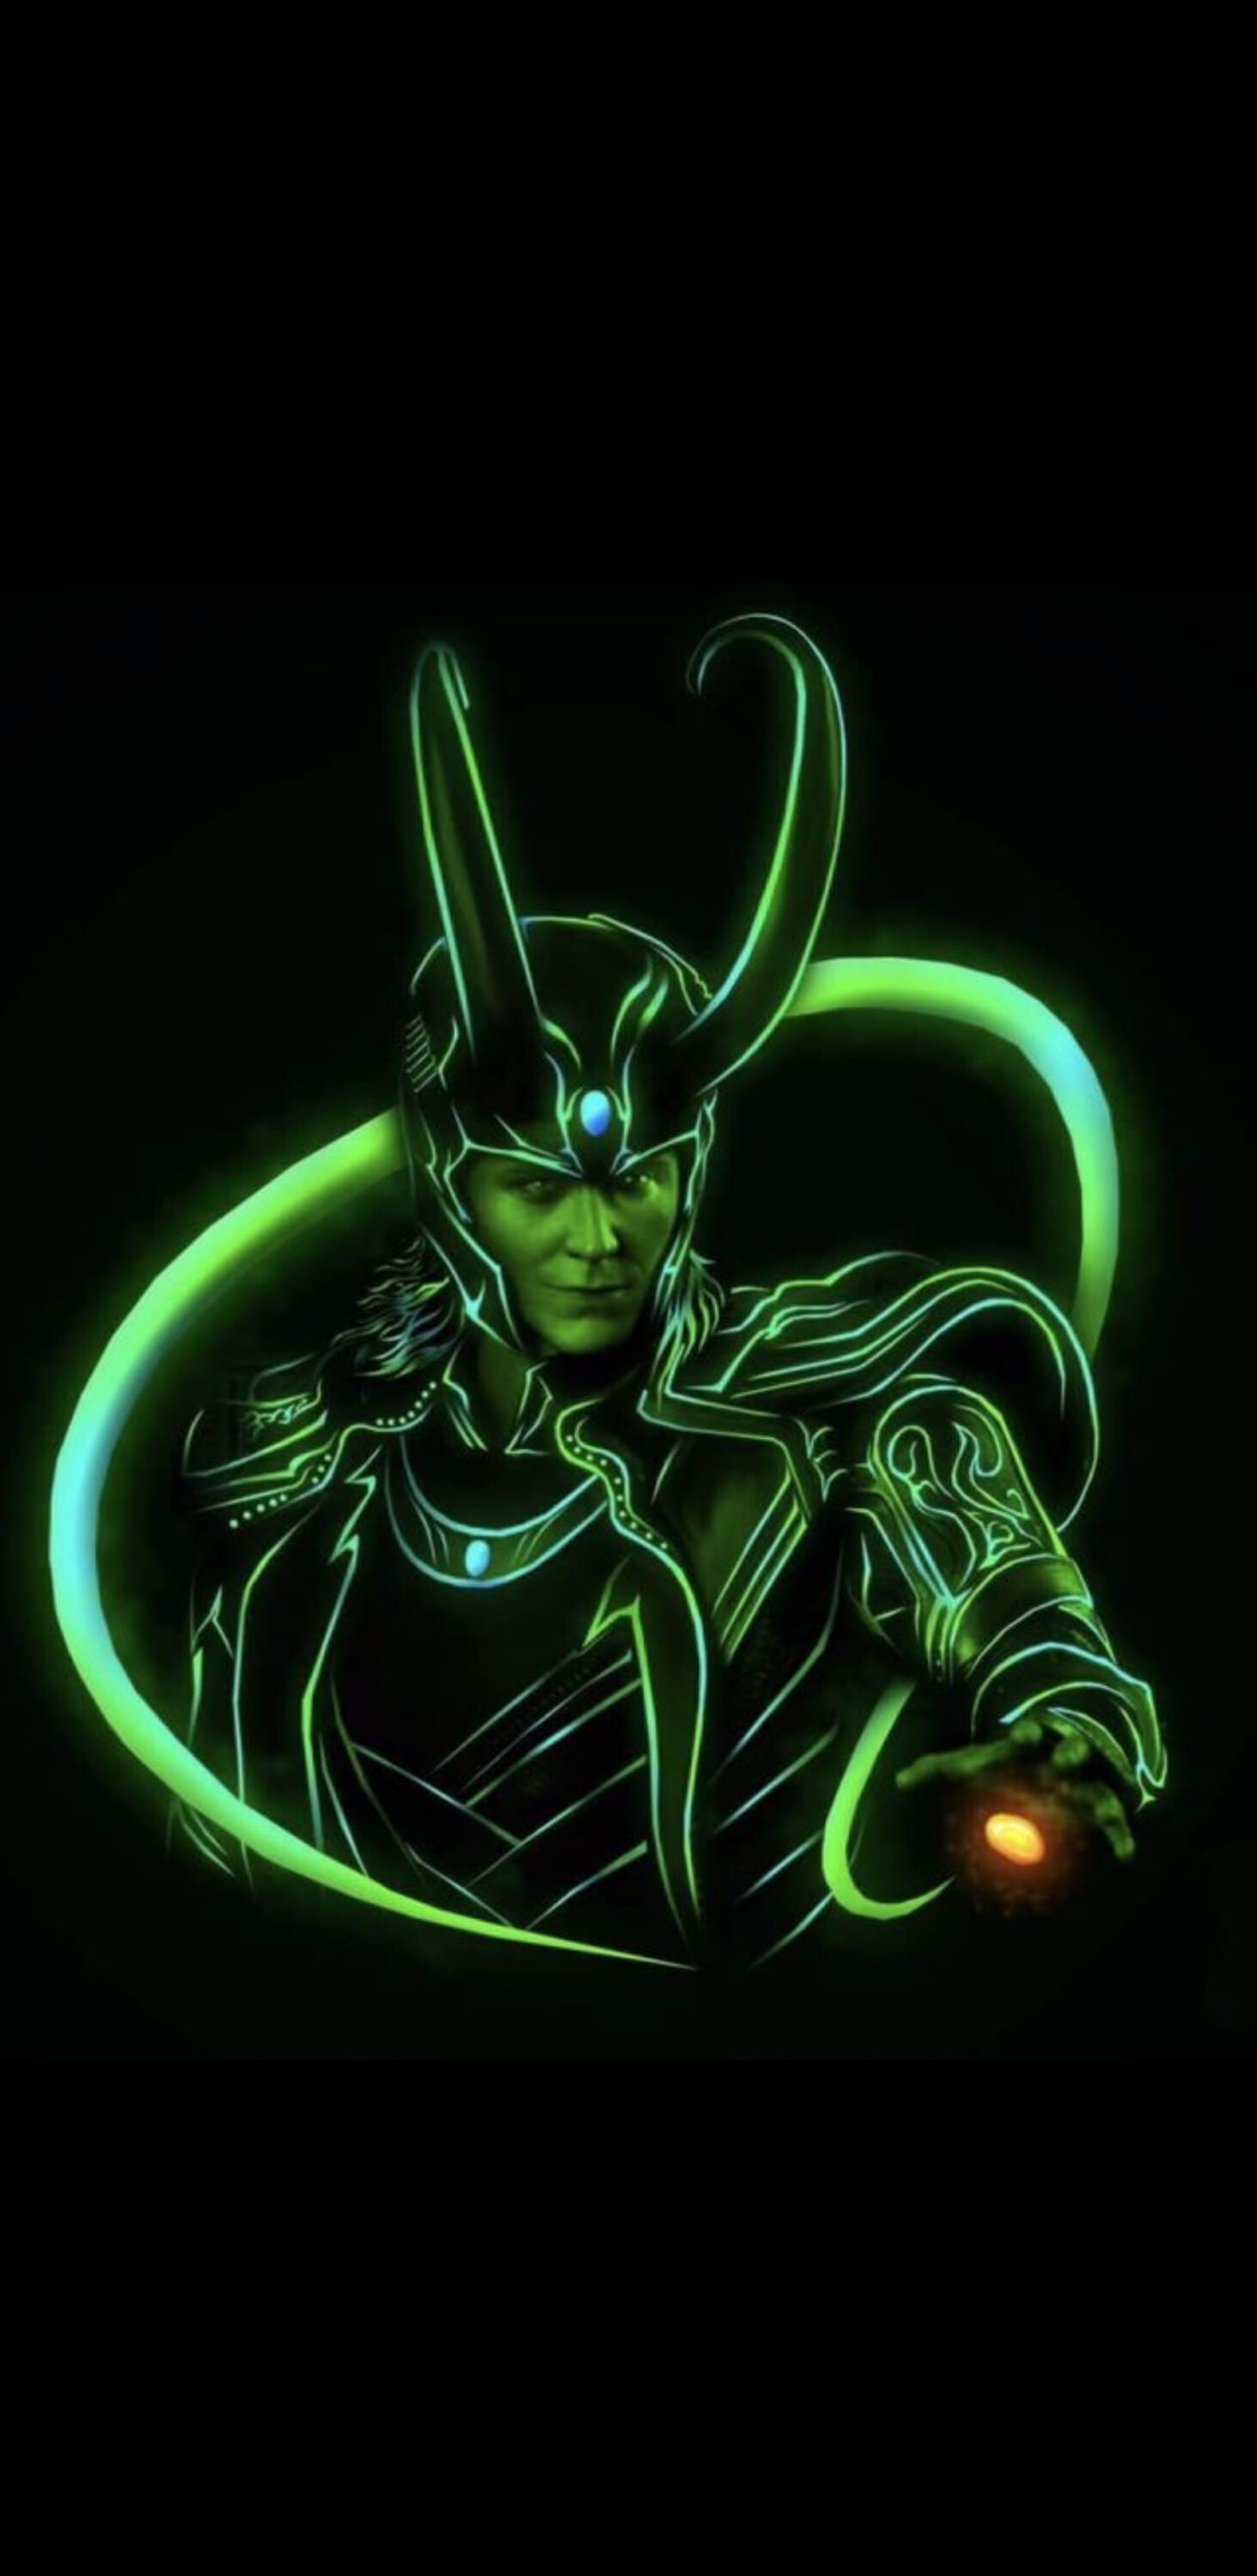 Loki (TV Series): TV show, The Asgardian "God of Mischief", the adopted son of Odin. 1470x3000 HD Wallpaper.